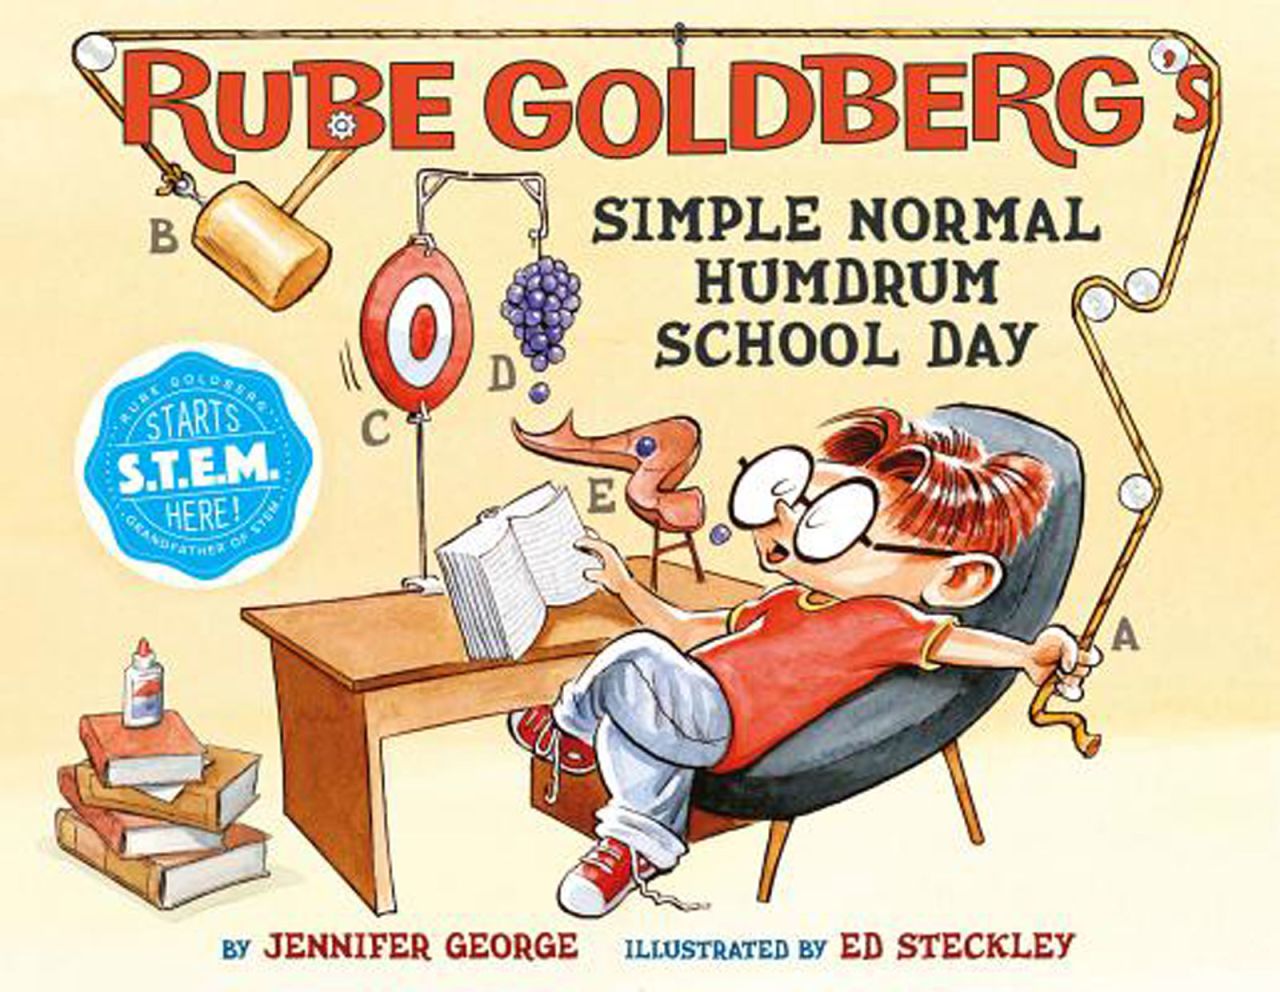 "Rube Goldberg's Simple Normal Humdrum School Day" by Jennifer George: Rube designs chain reactions to help him with tasks such as brushing his teeth and getting dressed. Diagrams of the machines make clear the order of operations and how each part affects the other. 